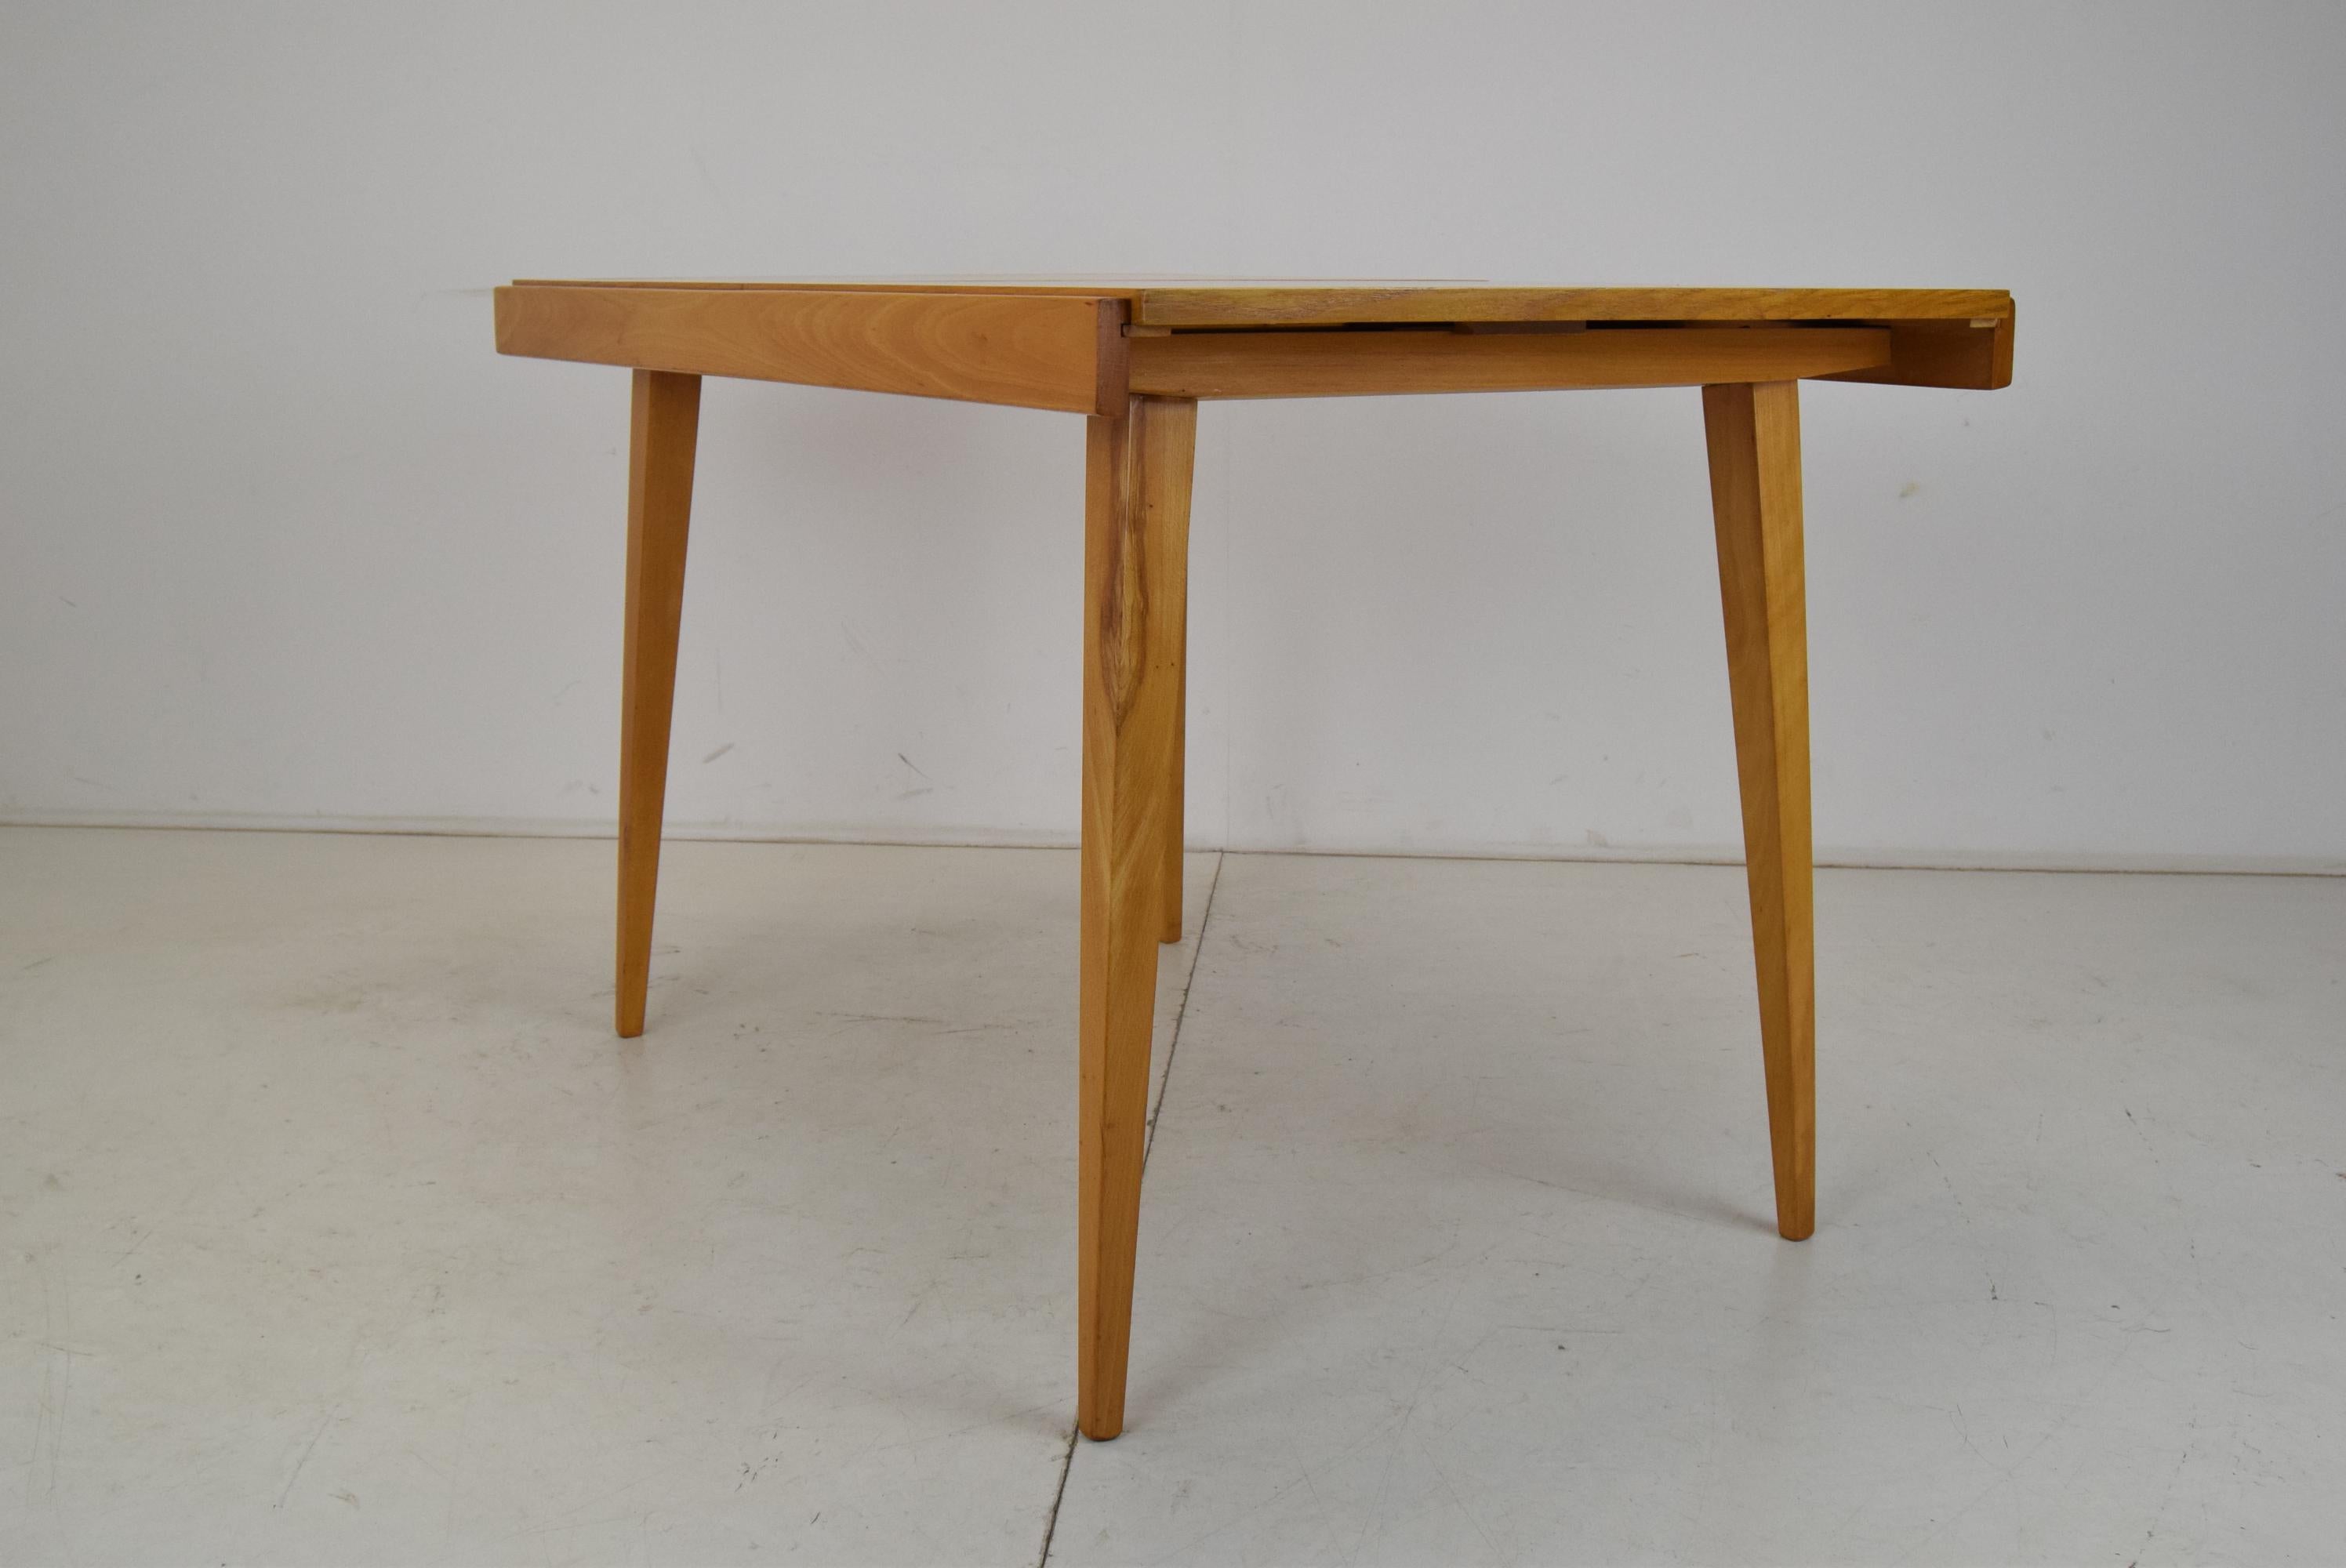 Wood Mid-Century Folding Dining Table by Frantisek Jirak for Tatra, 1960's For Sale